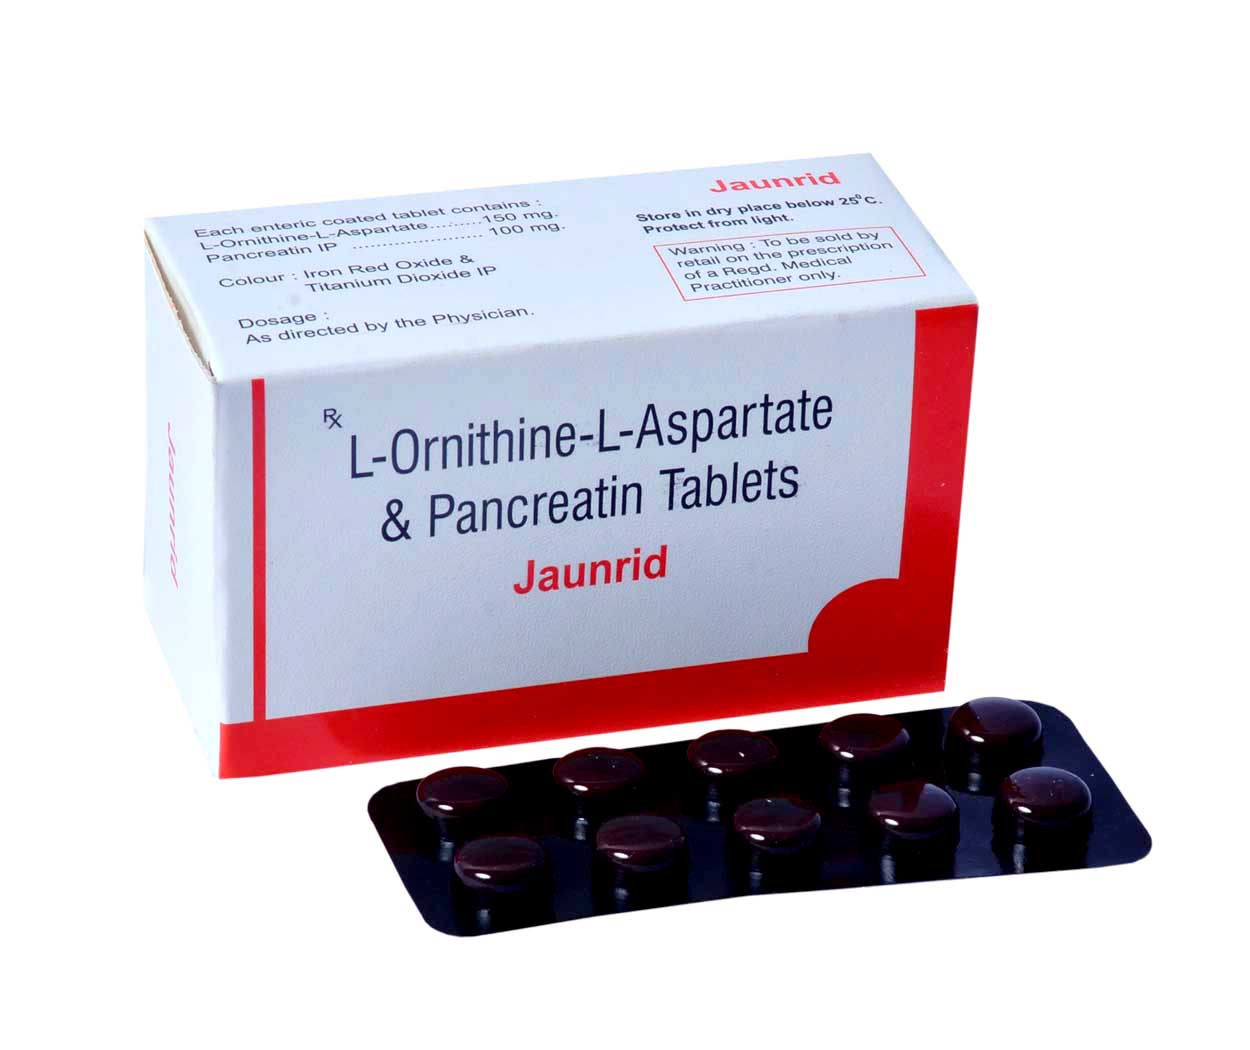 Product Name: Jaunrid, Compositions of Jaunrid are L-Ornithine-L-Aspartate & Pancreatin Tablets - Park Pharmaceuticals